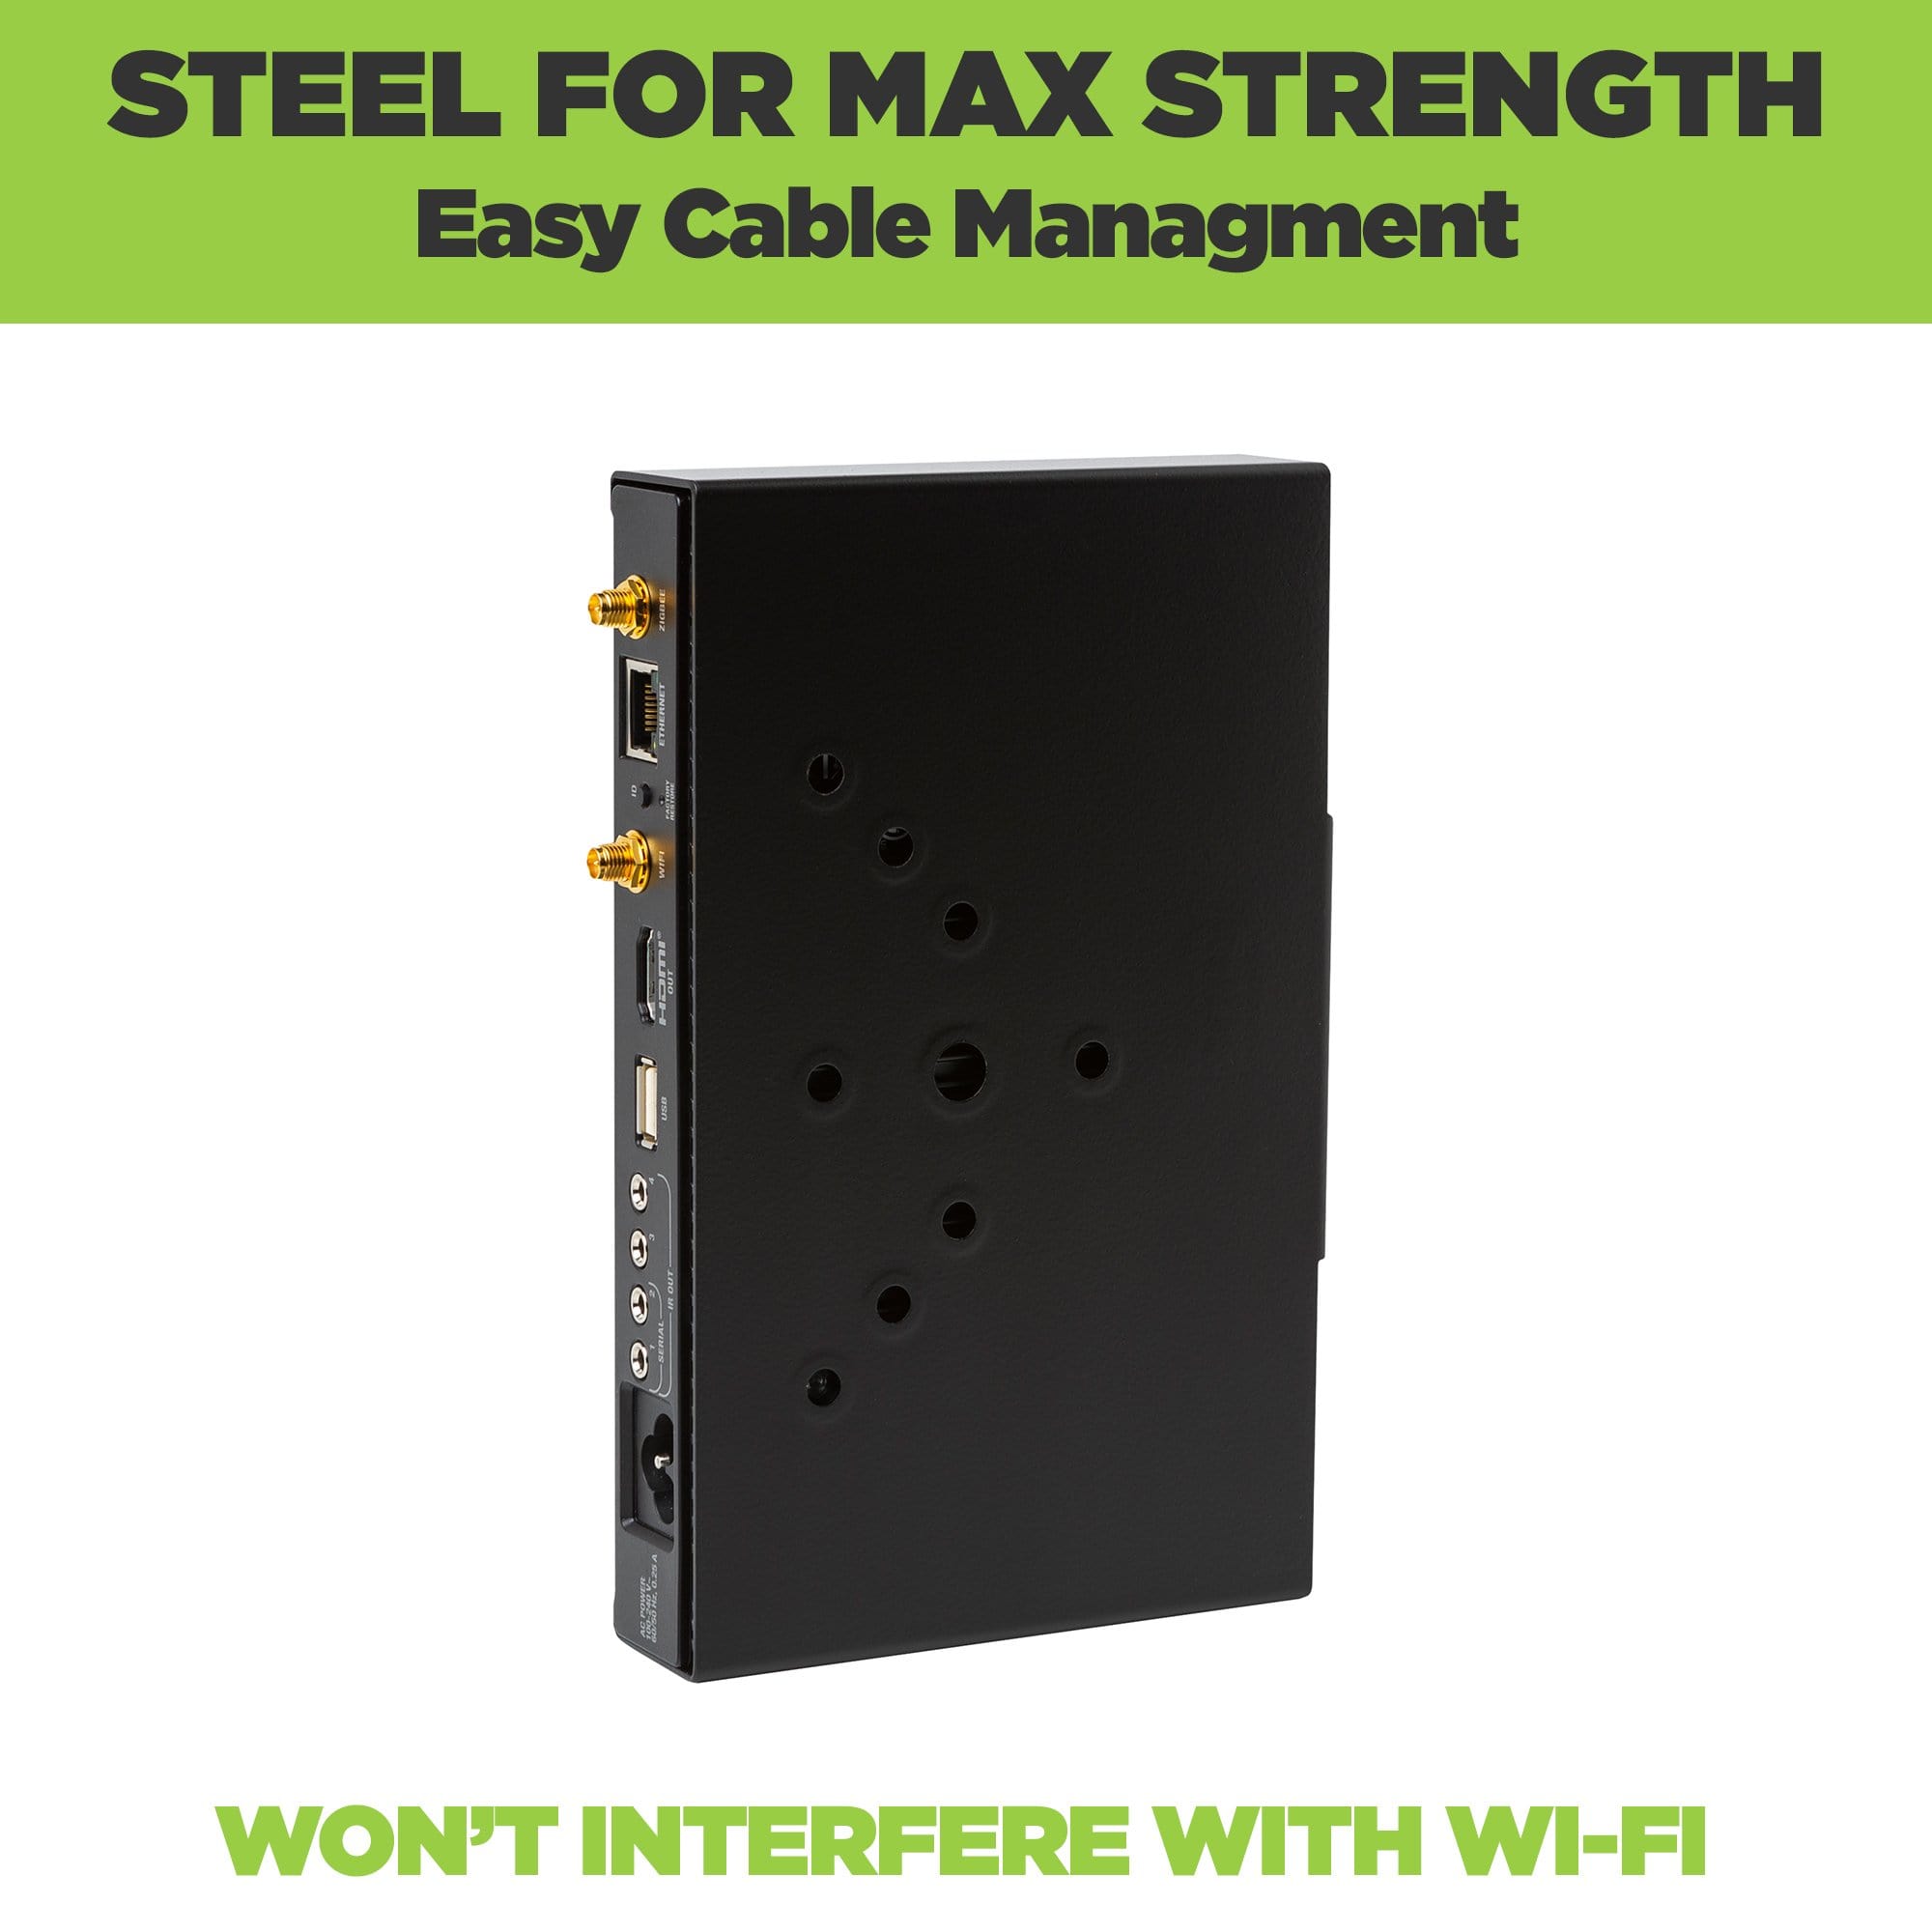 HIDEit EA-1 Wall Mount is made from steel for ultimate strength when mounted and won't interfere with Control4 systems.